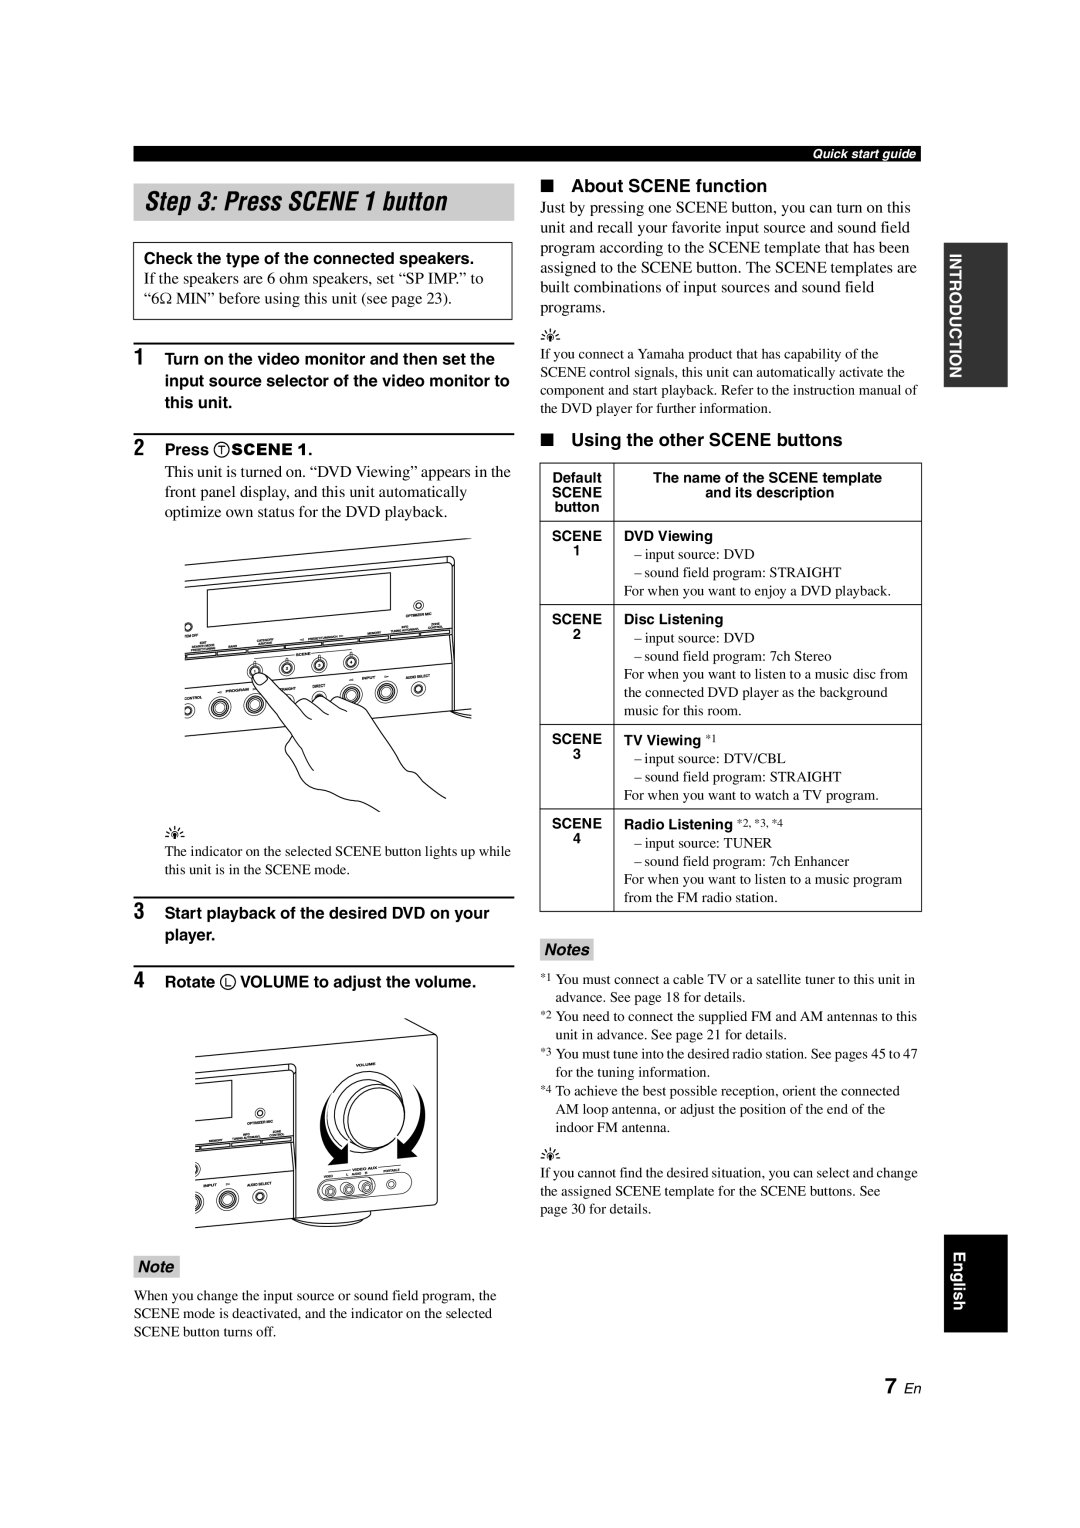 Yamaha RX-V563 7 En, About SCENE function, Using the other SCENE buttons, Check the type of the connected speakers 